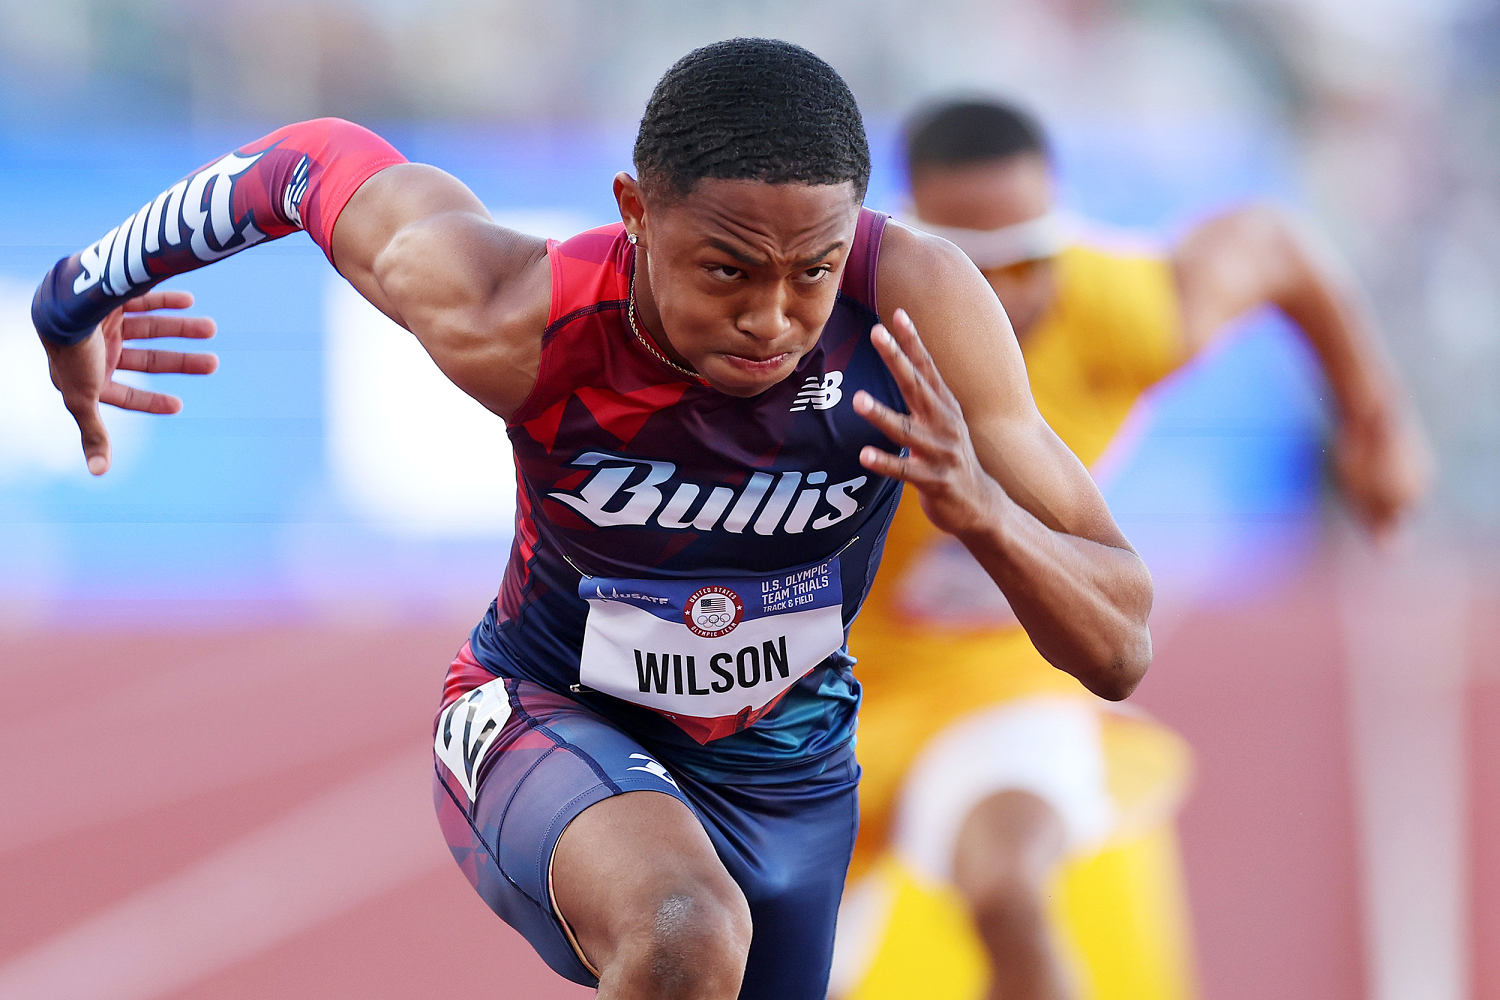 A 16-year-old was just fractions of a second shy of becoming youngest male U.S. track Olympian ever